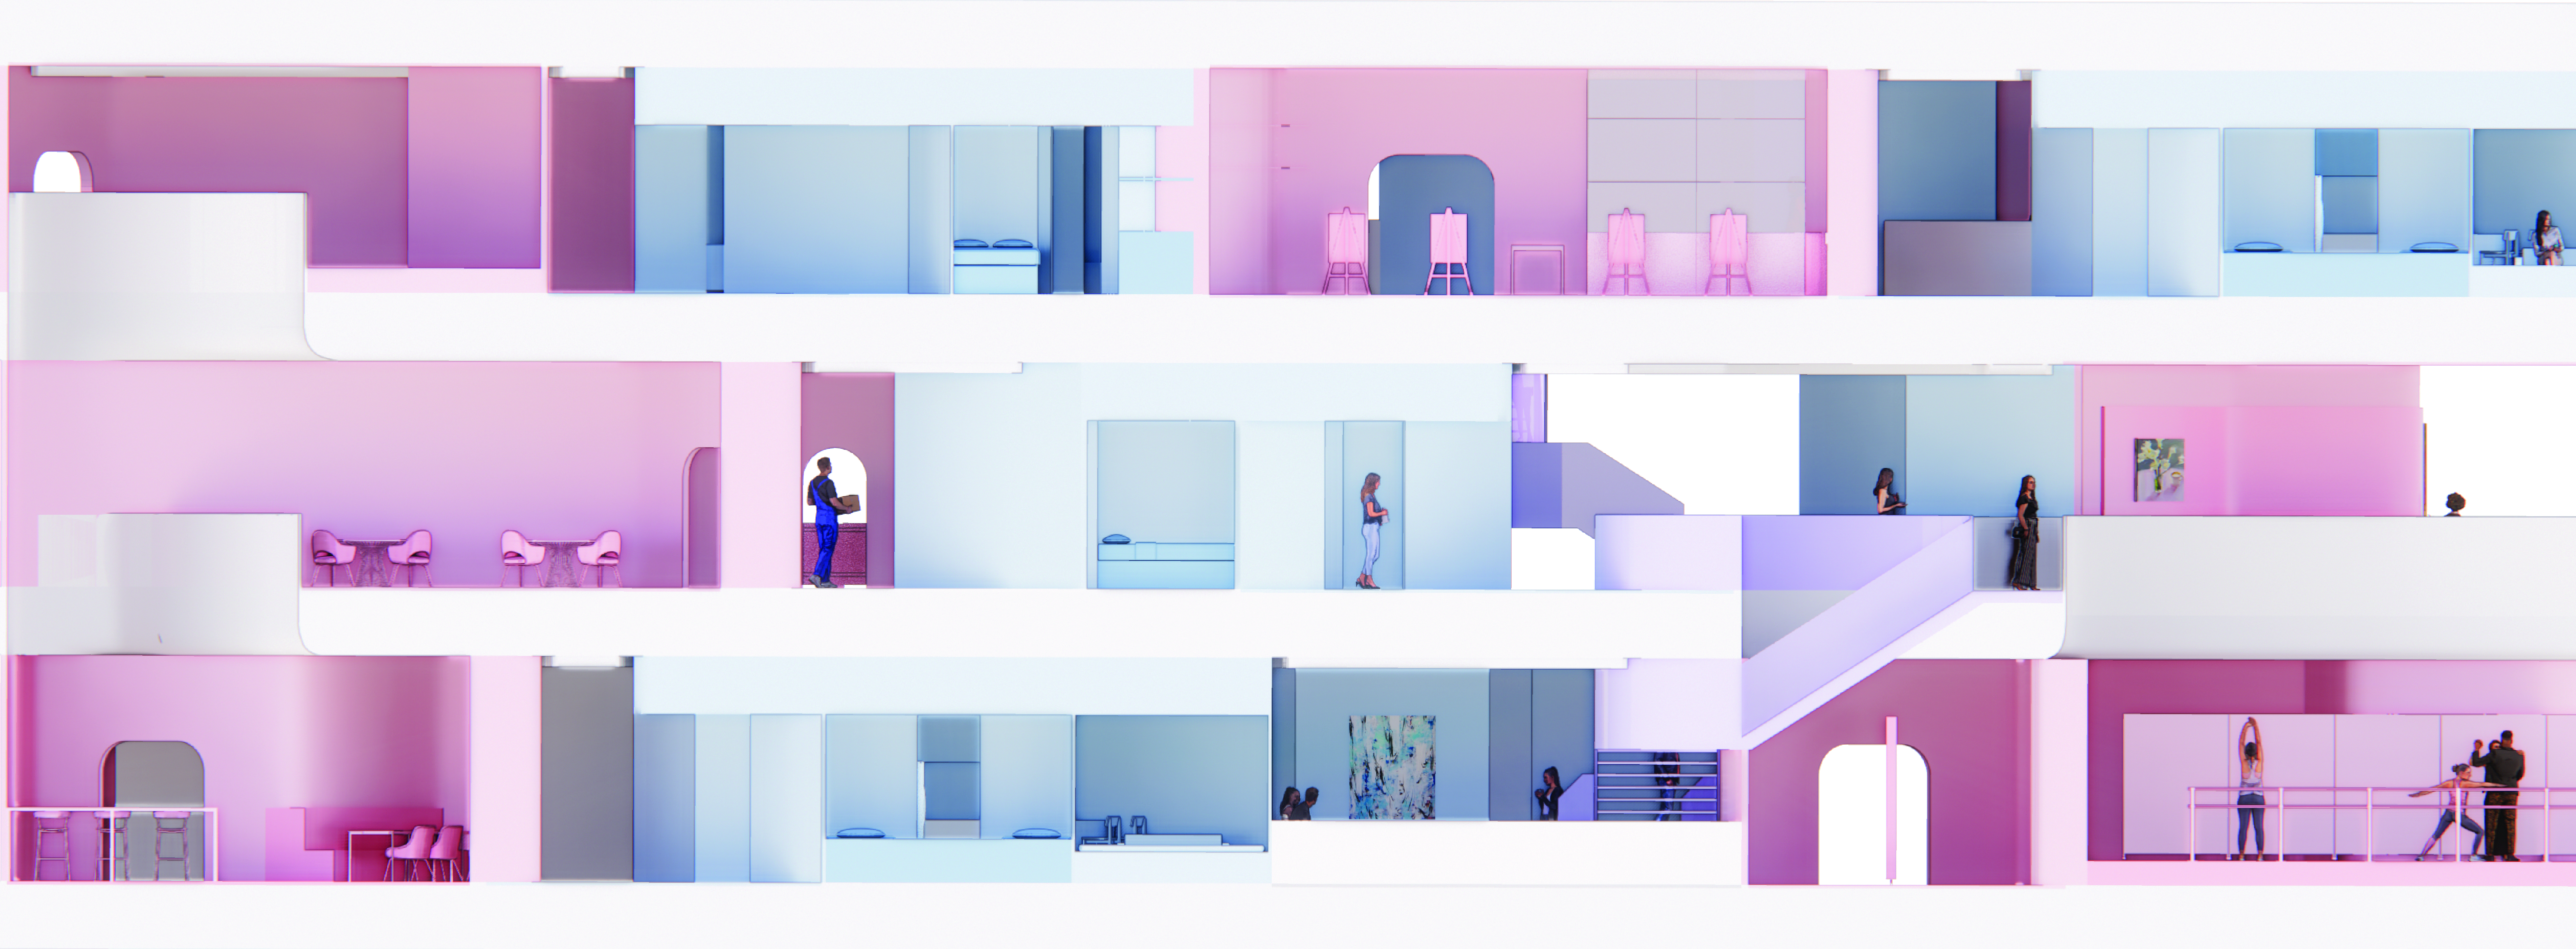 Section rendering of an artist residency in shades of pink, purple and blue